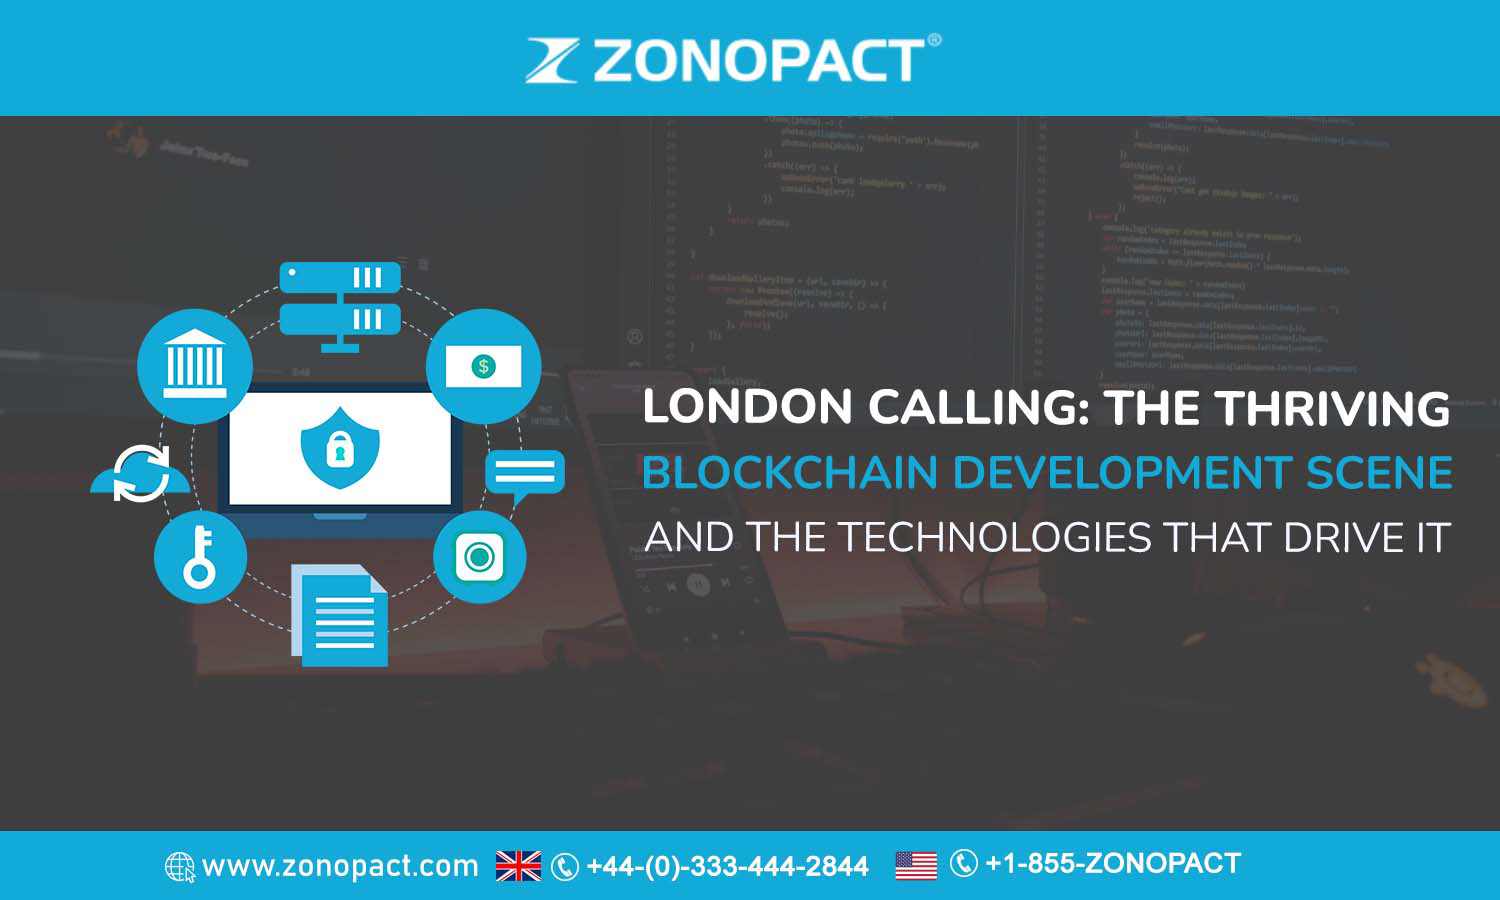 London Calling The Thriving Blockchain Development Scene and the Technologies that Drive It (1)